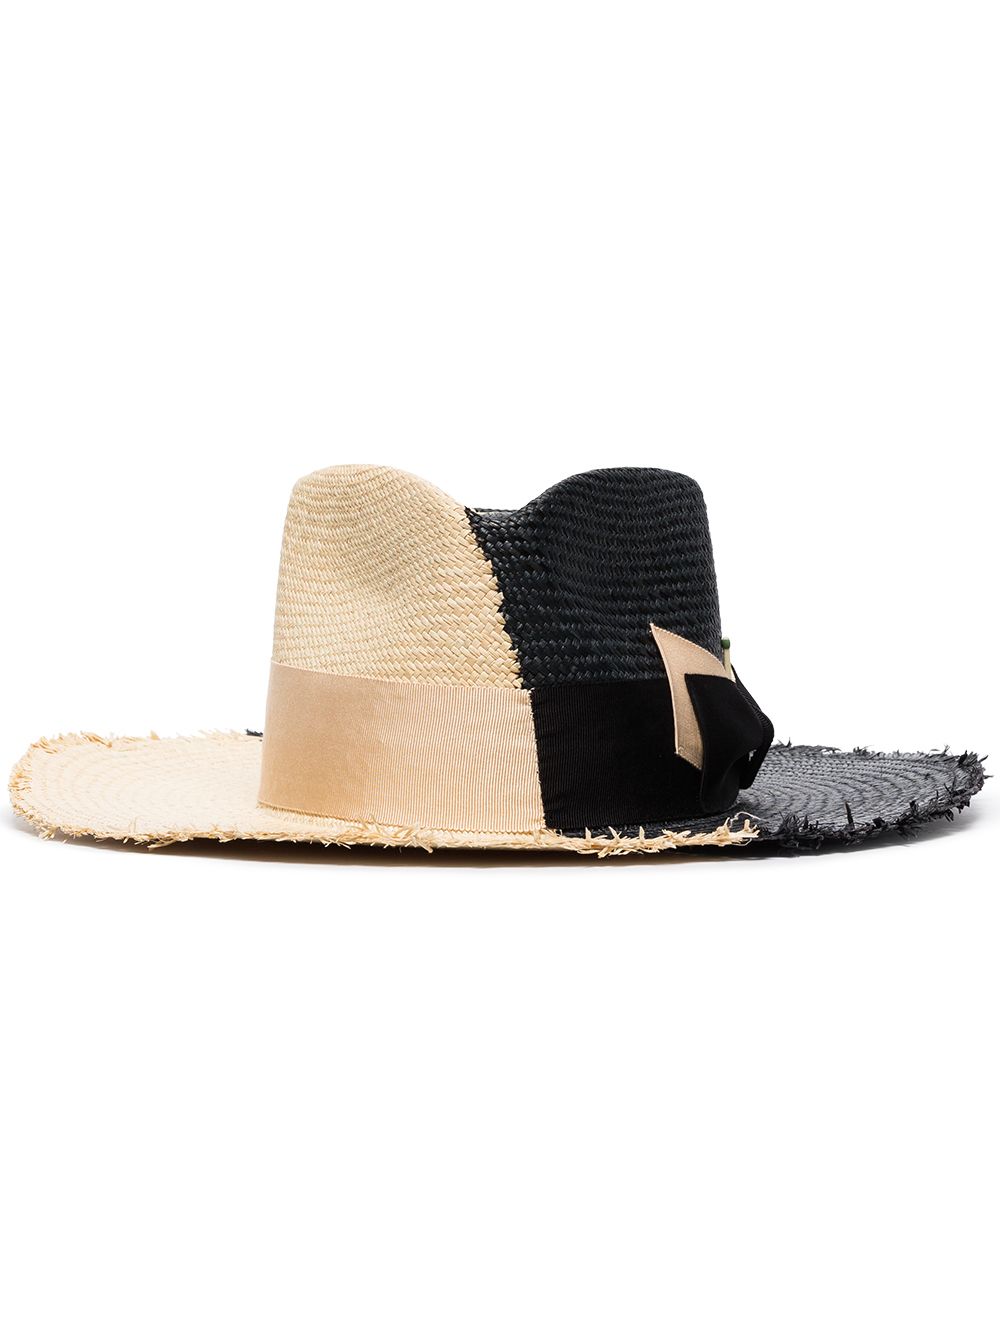 NICK FOUQUET NICK F TREE BOW-EMBELLISHED STRAW HAT